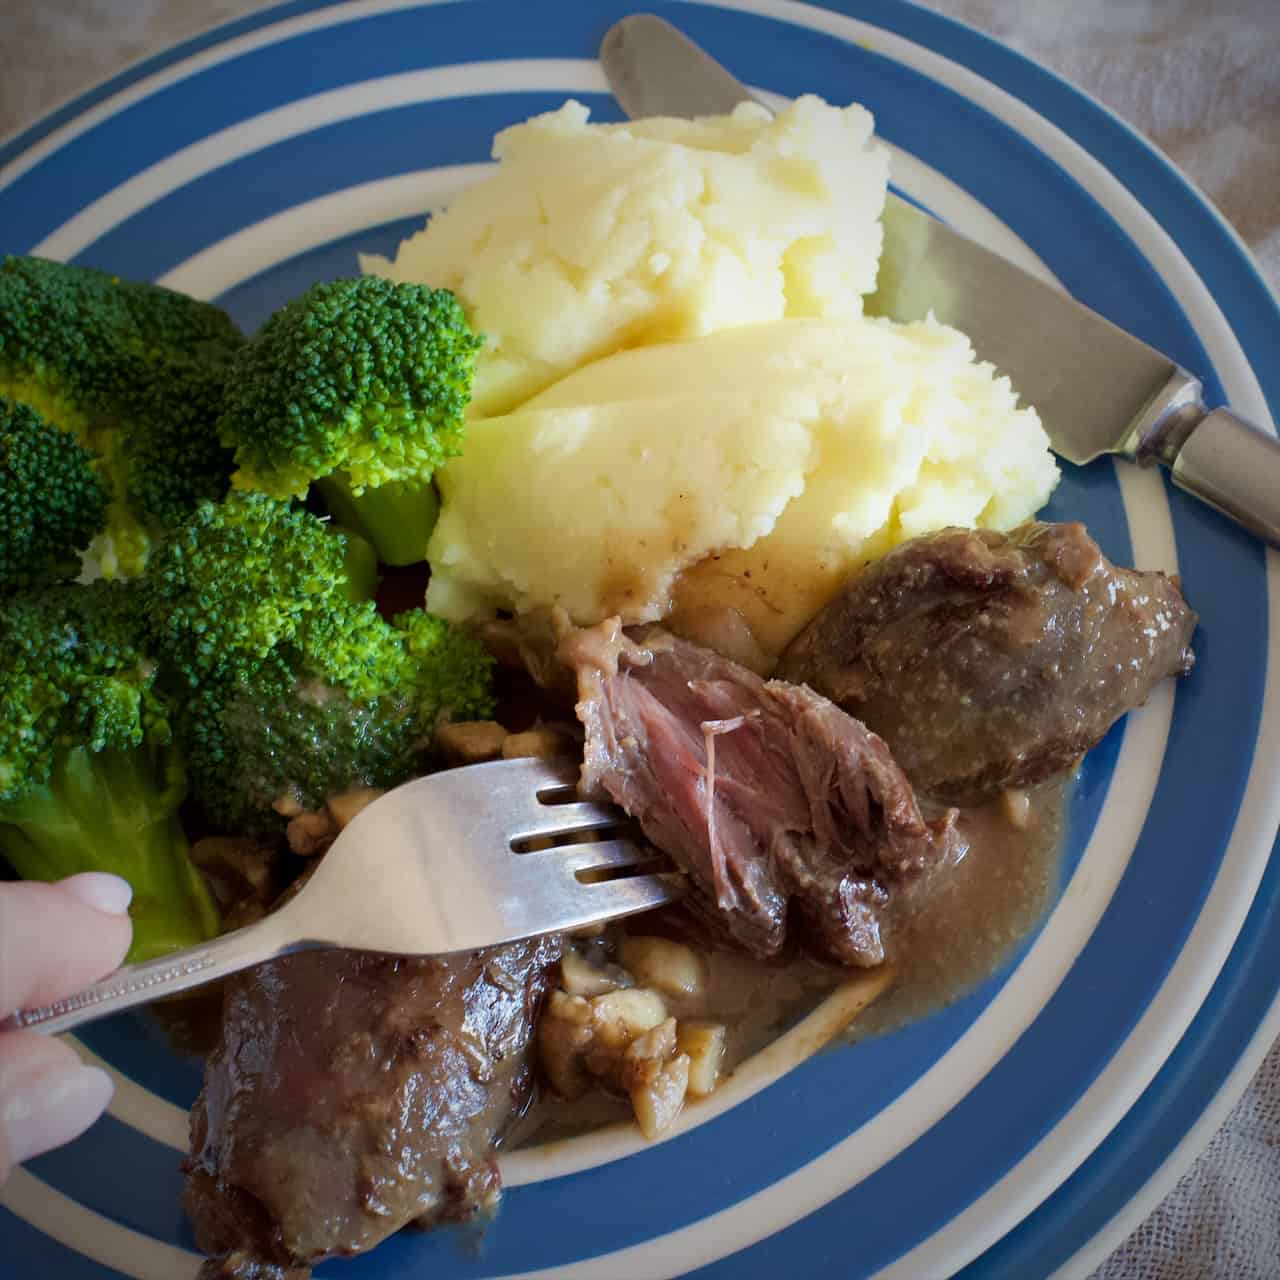 Blue and white striped plate filled with mashed potato, broccoli and fall apart tender venison shank in gravy